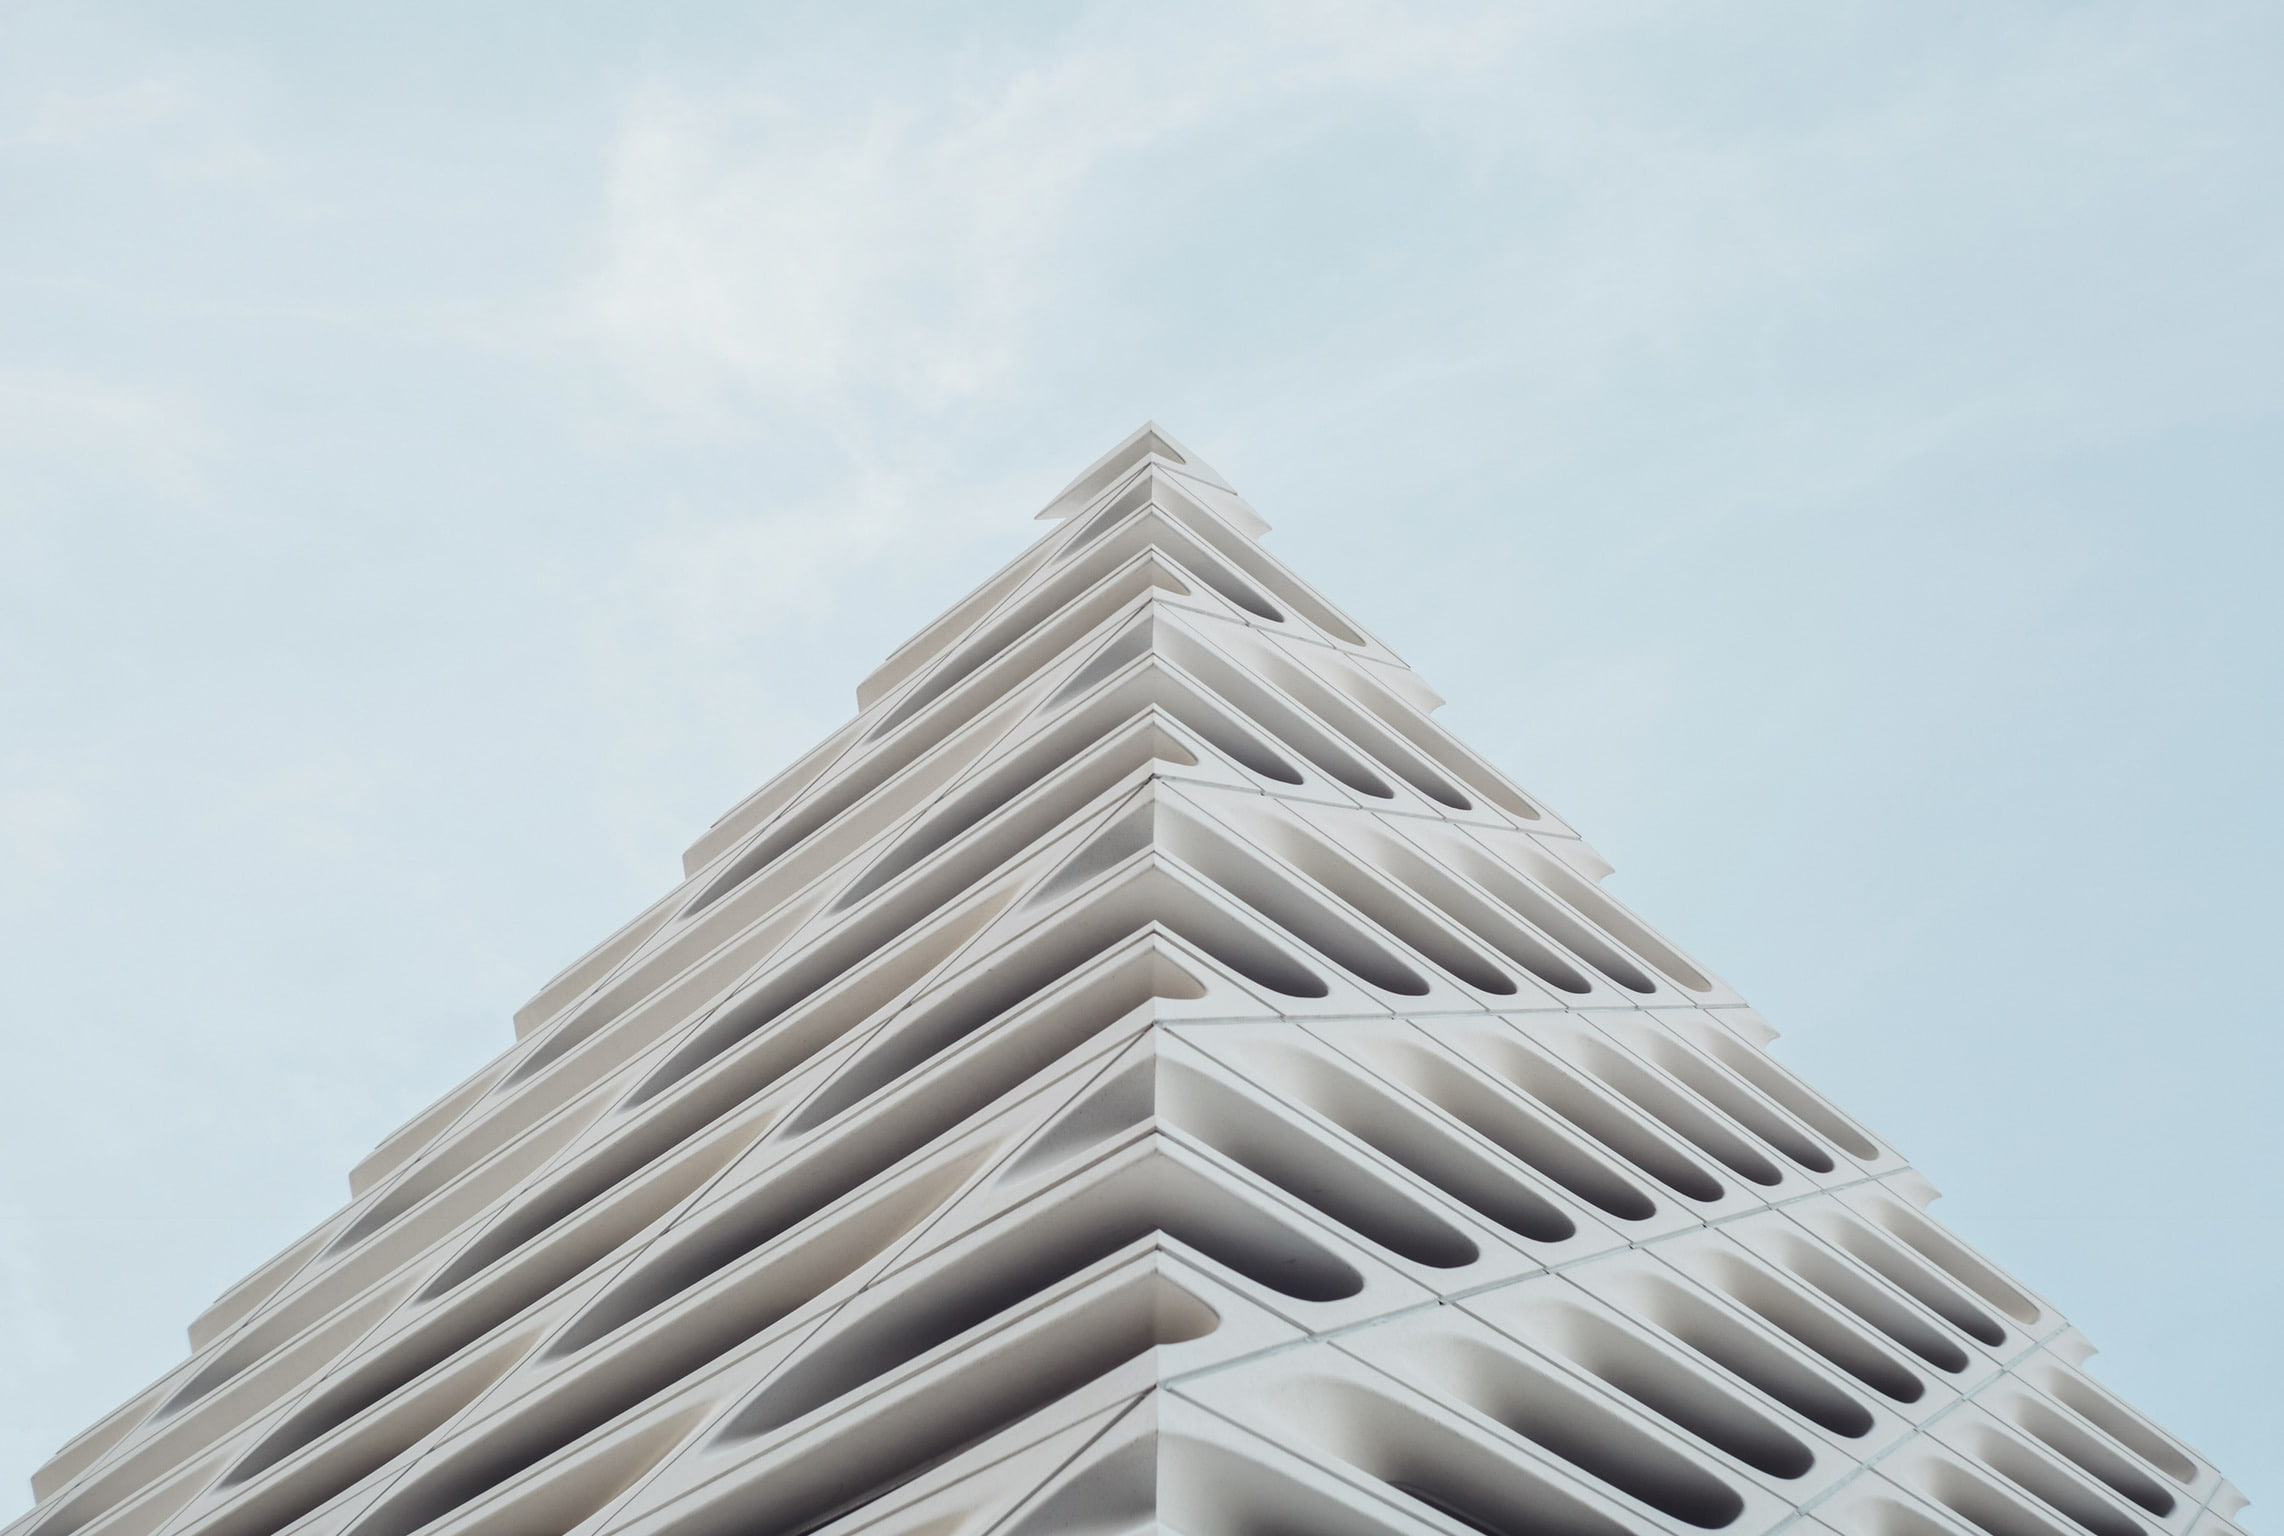 building, architecture, minimalism, low angle view, sky, built structure